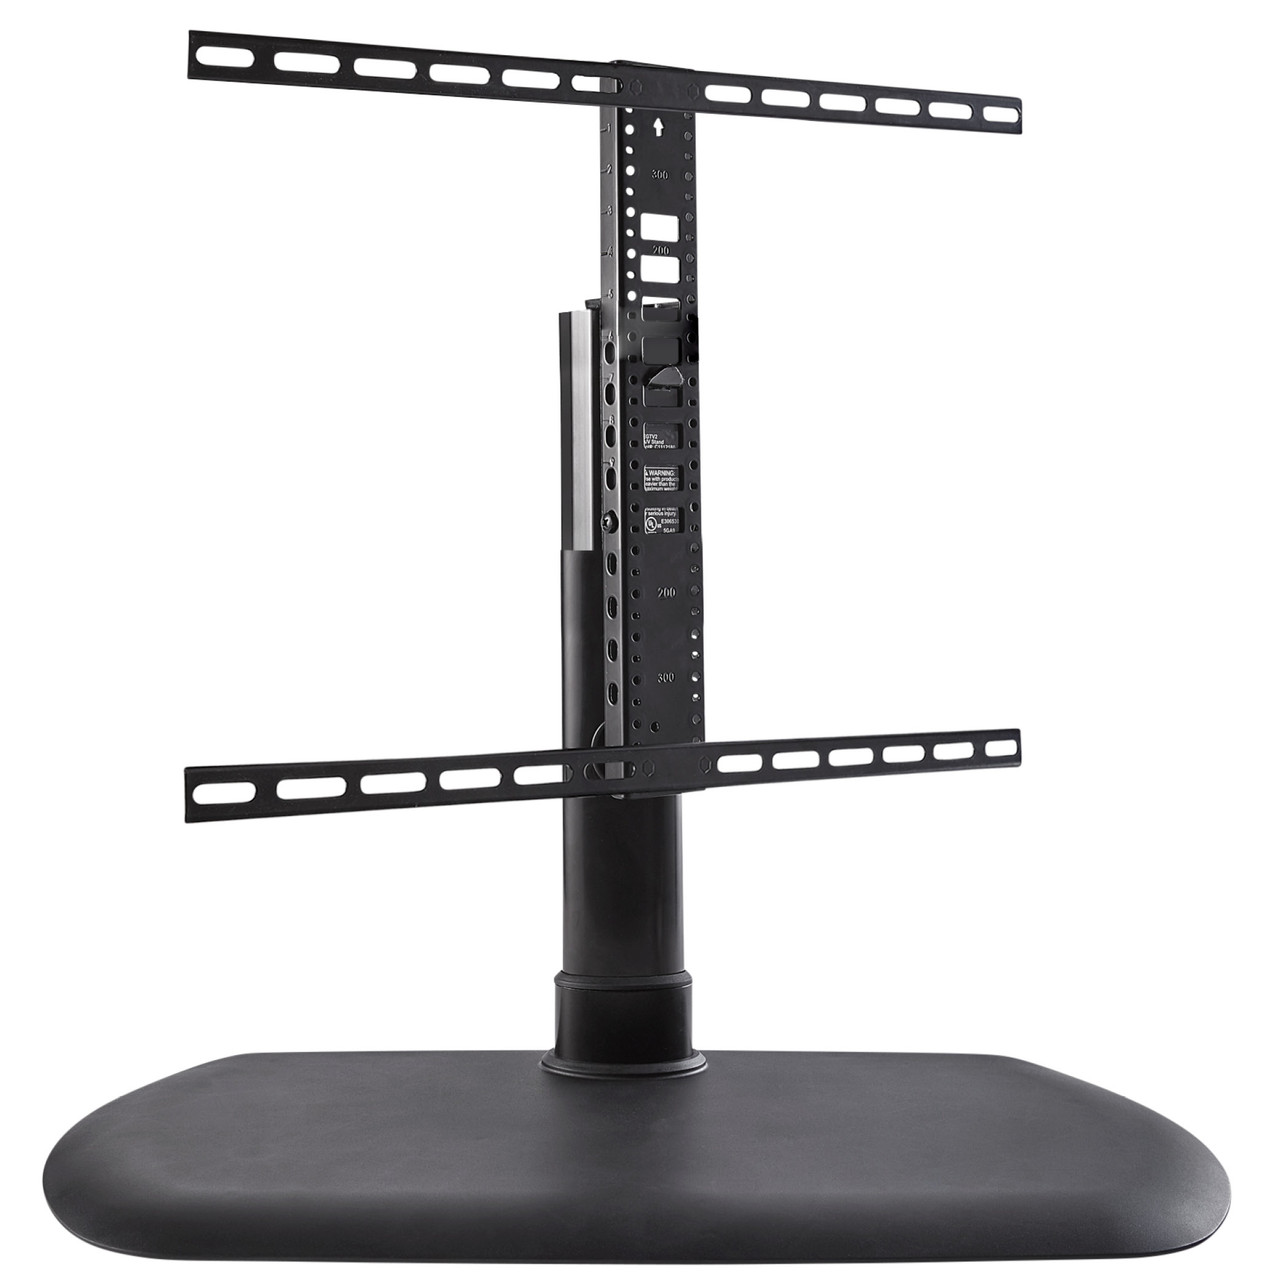 replacement tv stand for LG, Vizio, TCL